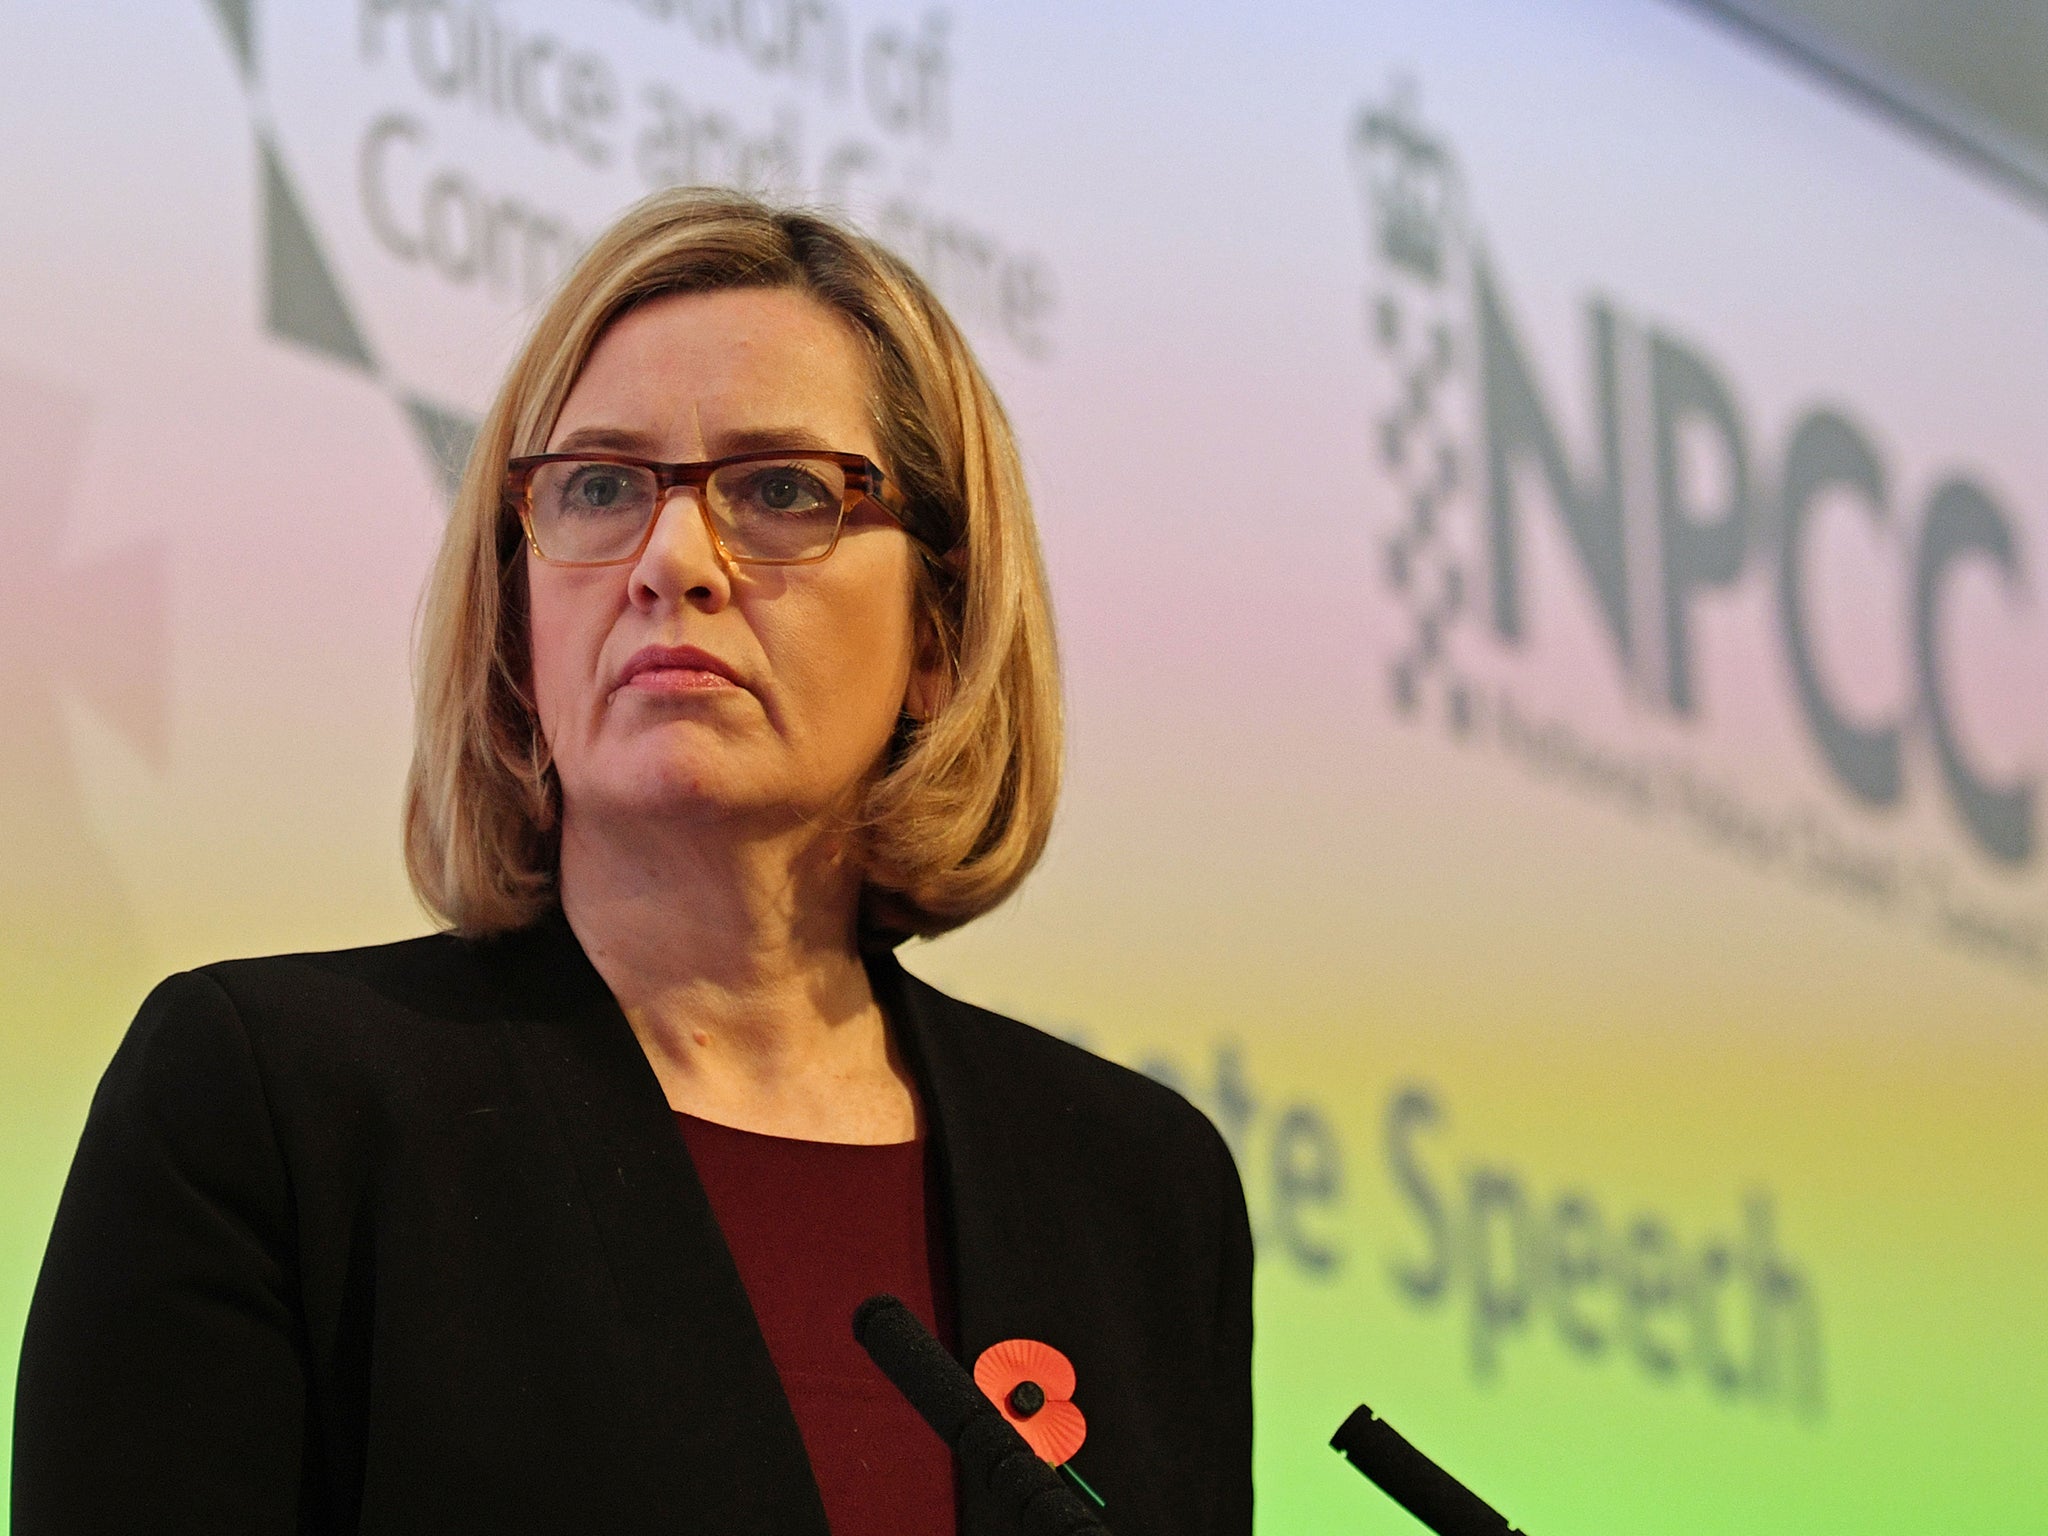 Home Secretary Amber Rudd has denied recent requests for increased police funding by forces saying they are struggling to cope with the terror threat and increased demand